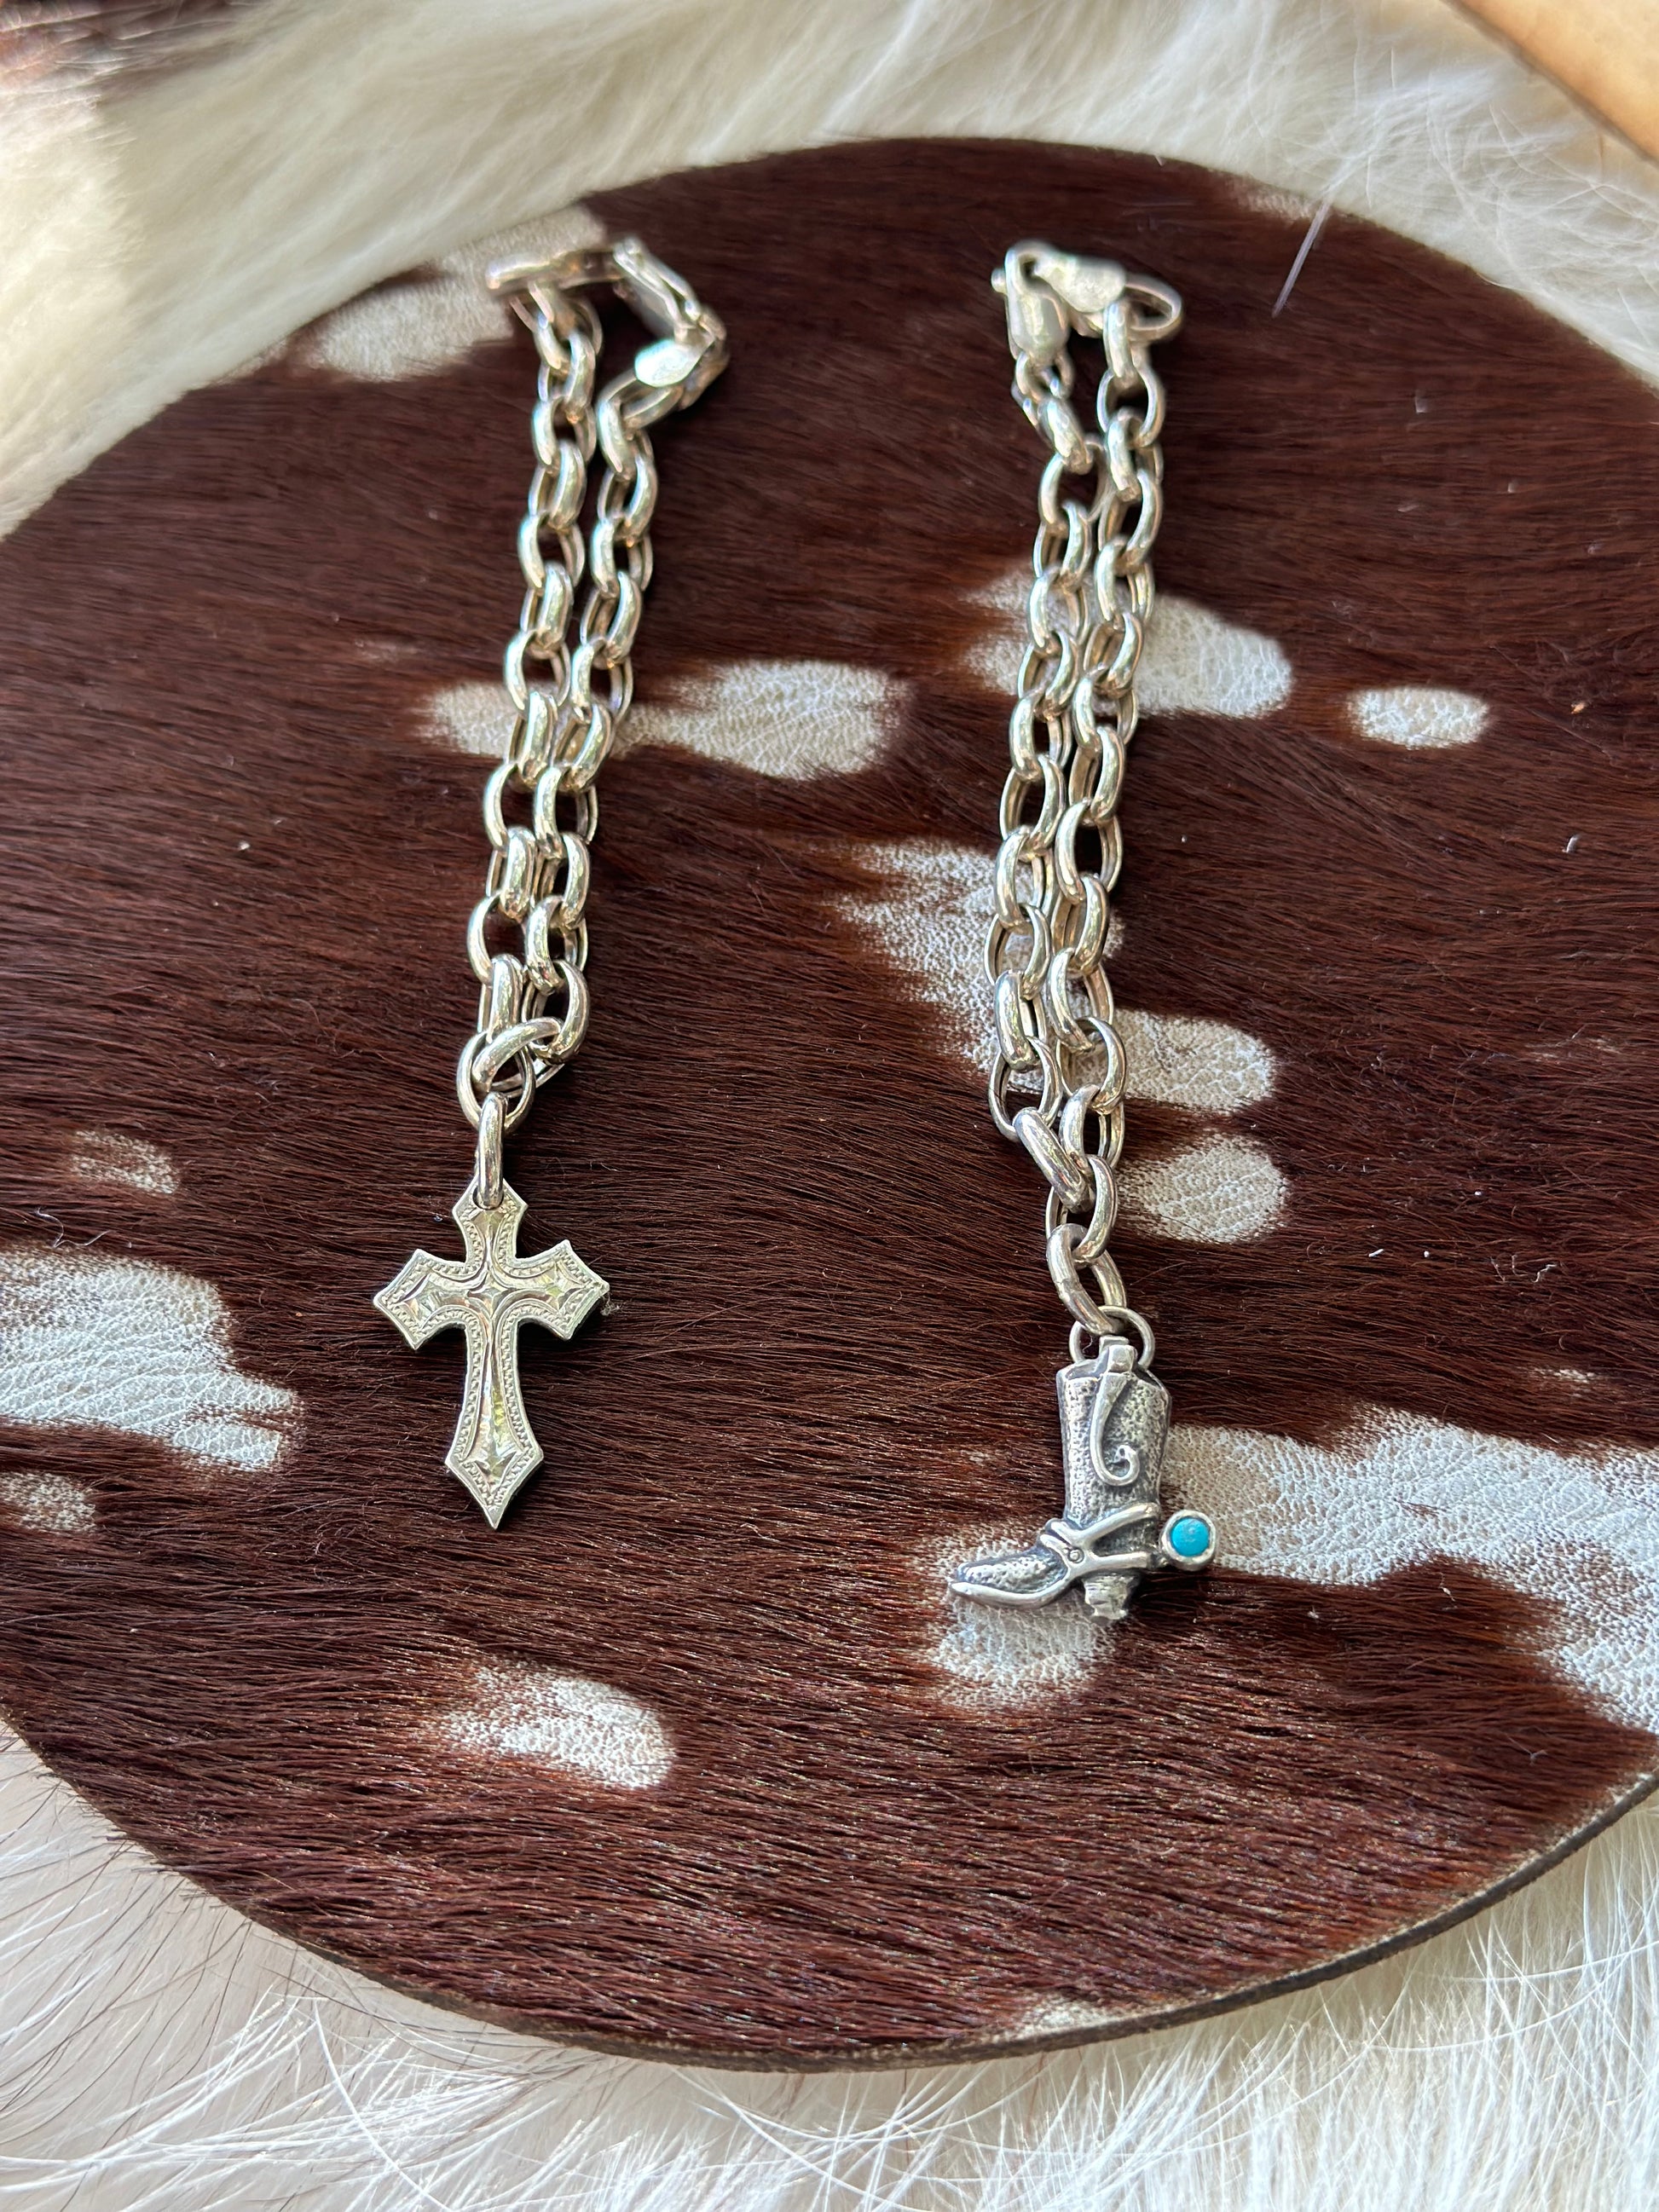 charm bracelets with cross and cowboy boot